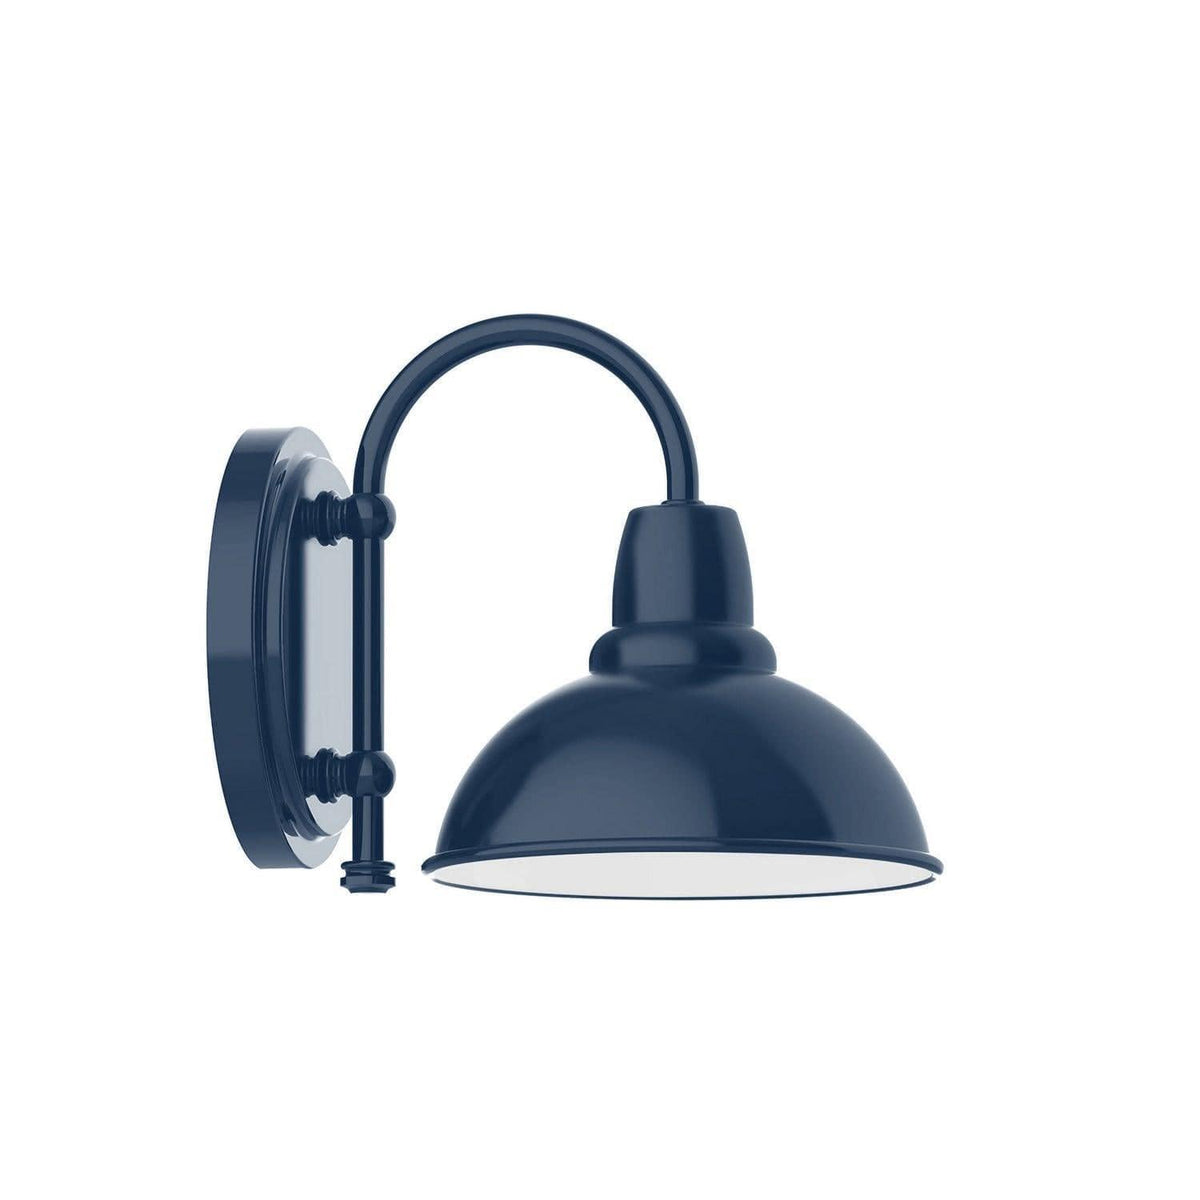 Montclair Light Works - Cafe 8" Wall Sconce - SCB105-50 | Montreal Lighting & Hardware